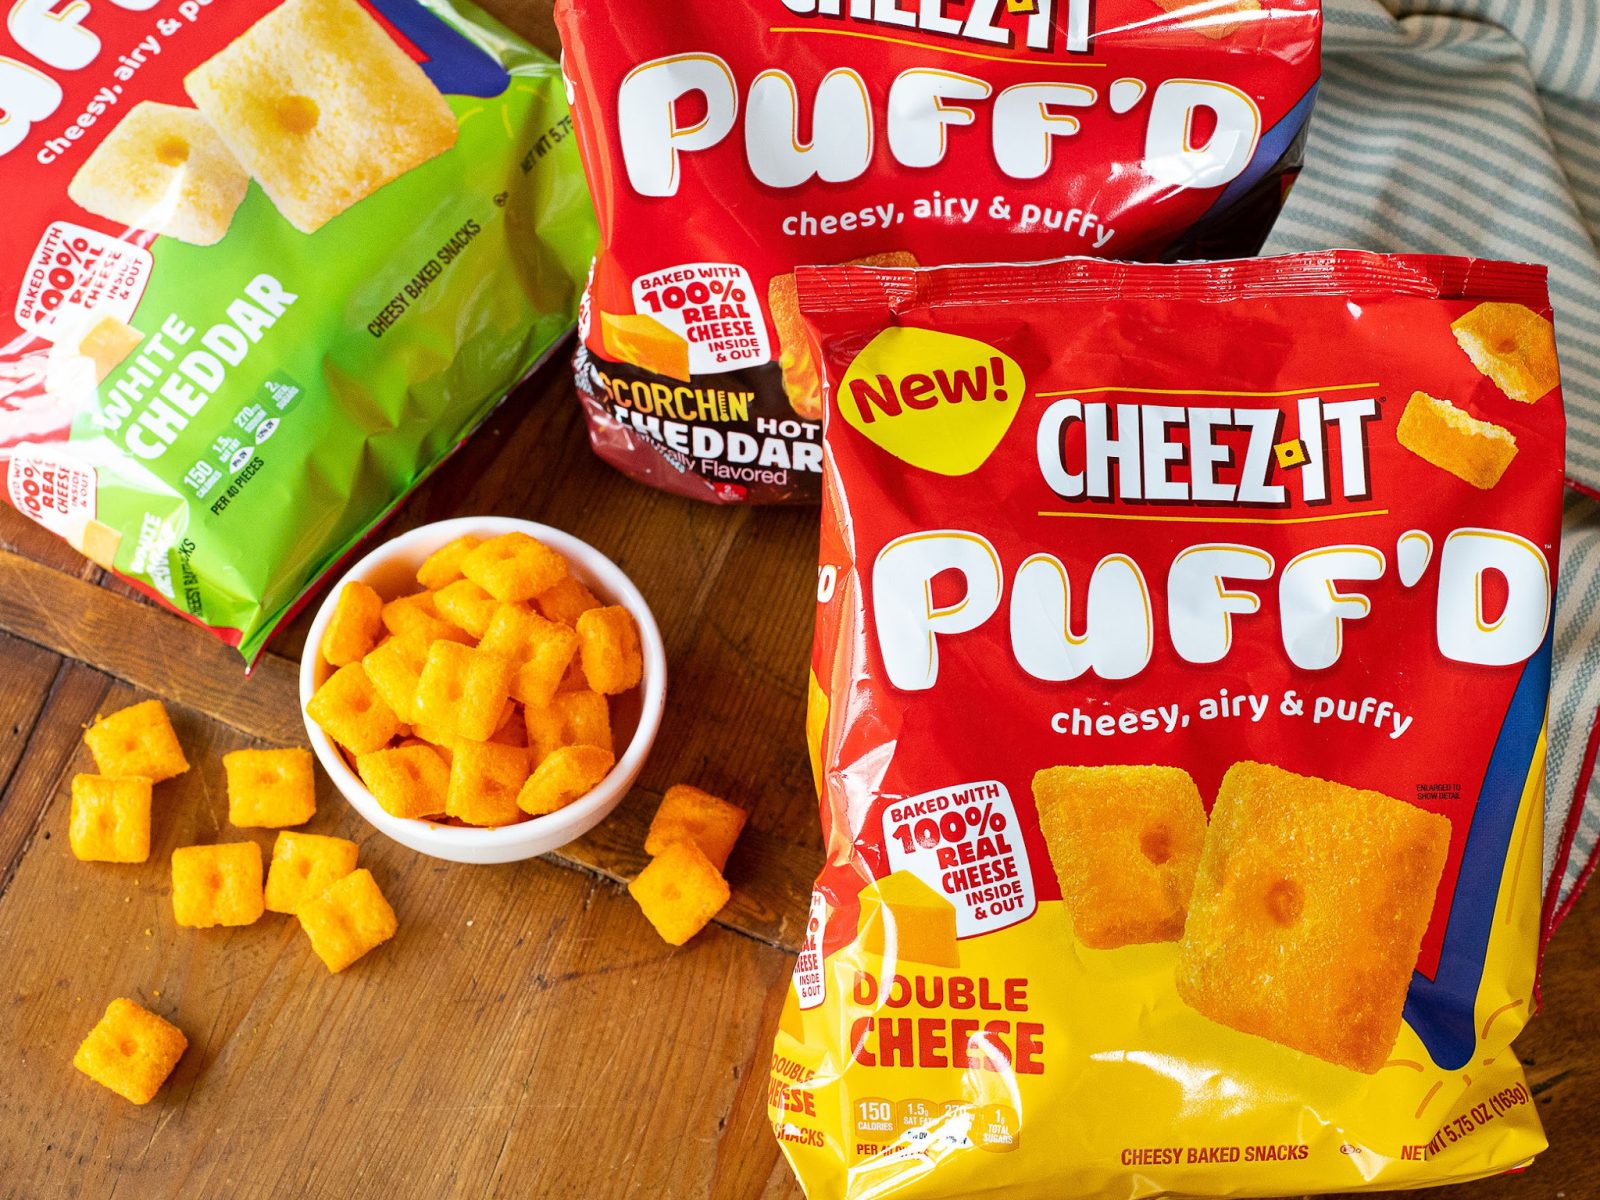 Cheez-It Crackers, Puff’d Snacks, Grooves and As Low As $1.32 At Kroger